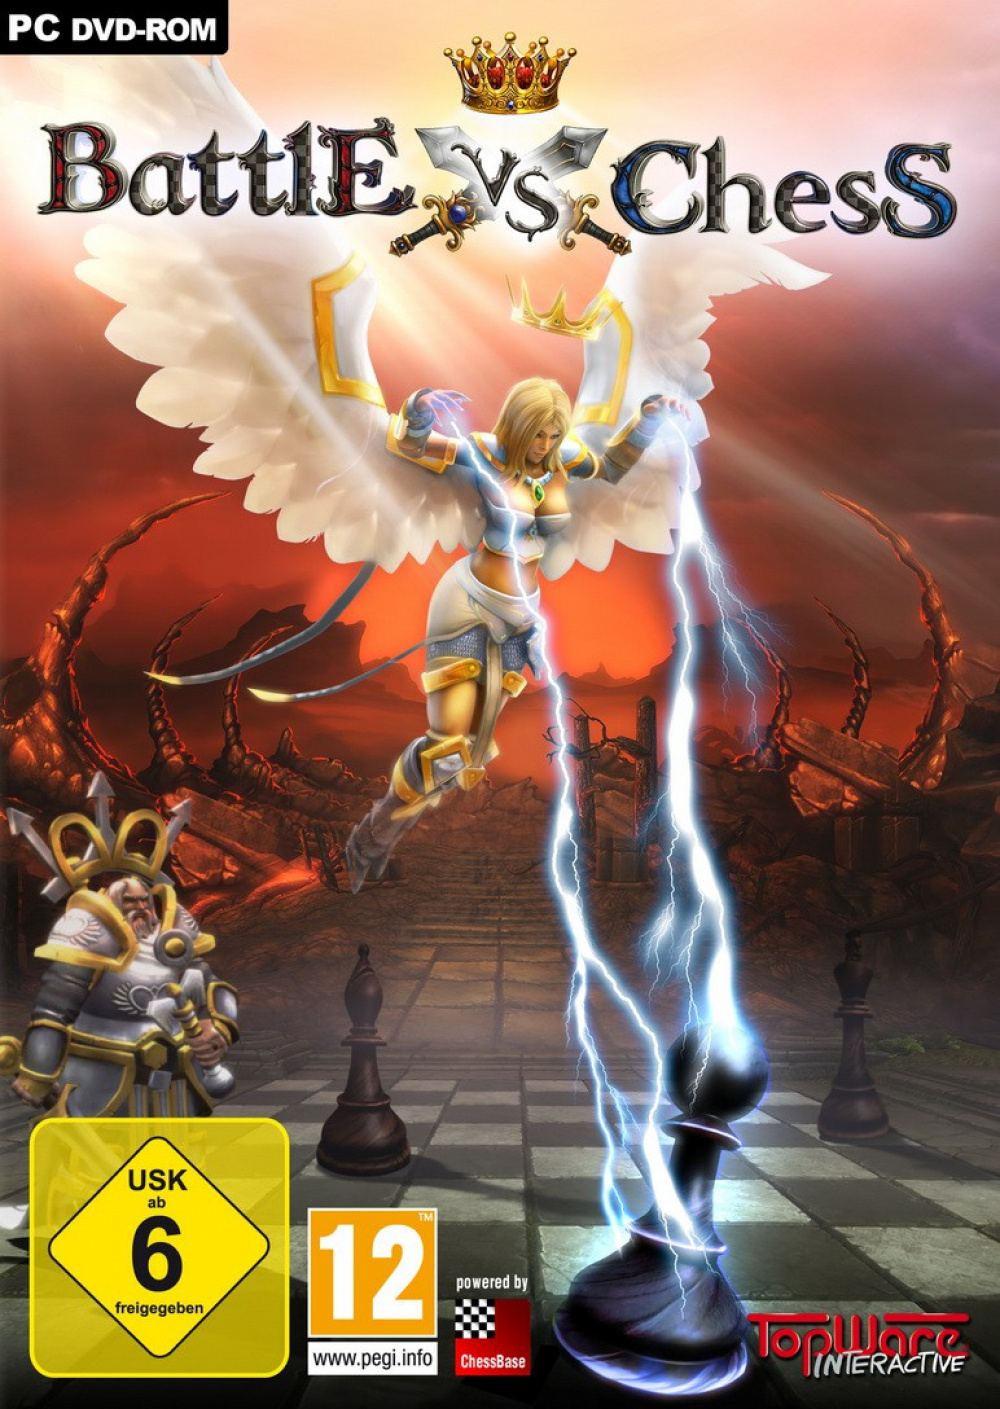 Battle vs Chess  Video Game Reviews and Previews PC, PS4, Xbox One and  mobile